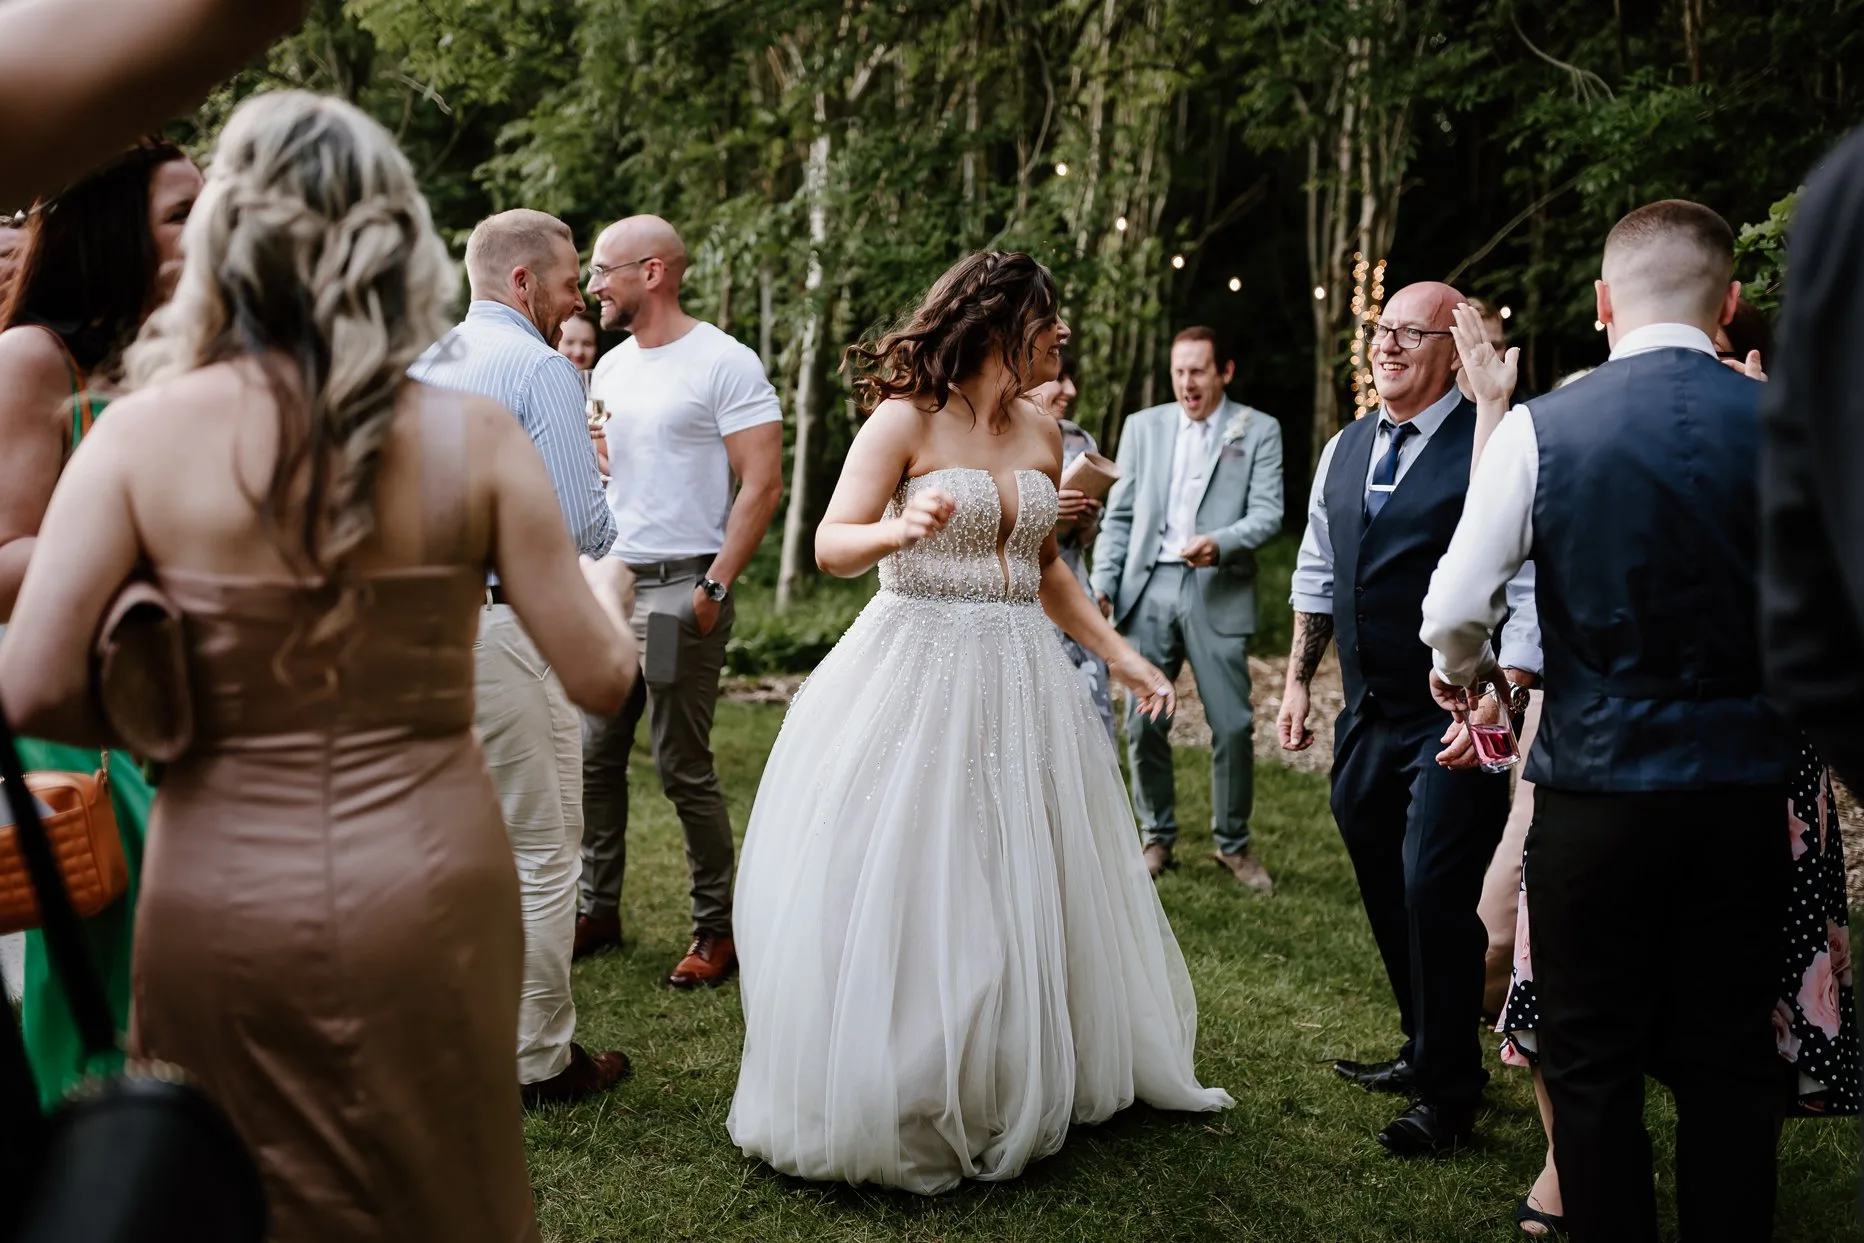 Bride dancing in the woods with her wedding guests after the first dance at Oaklands wedding venue.